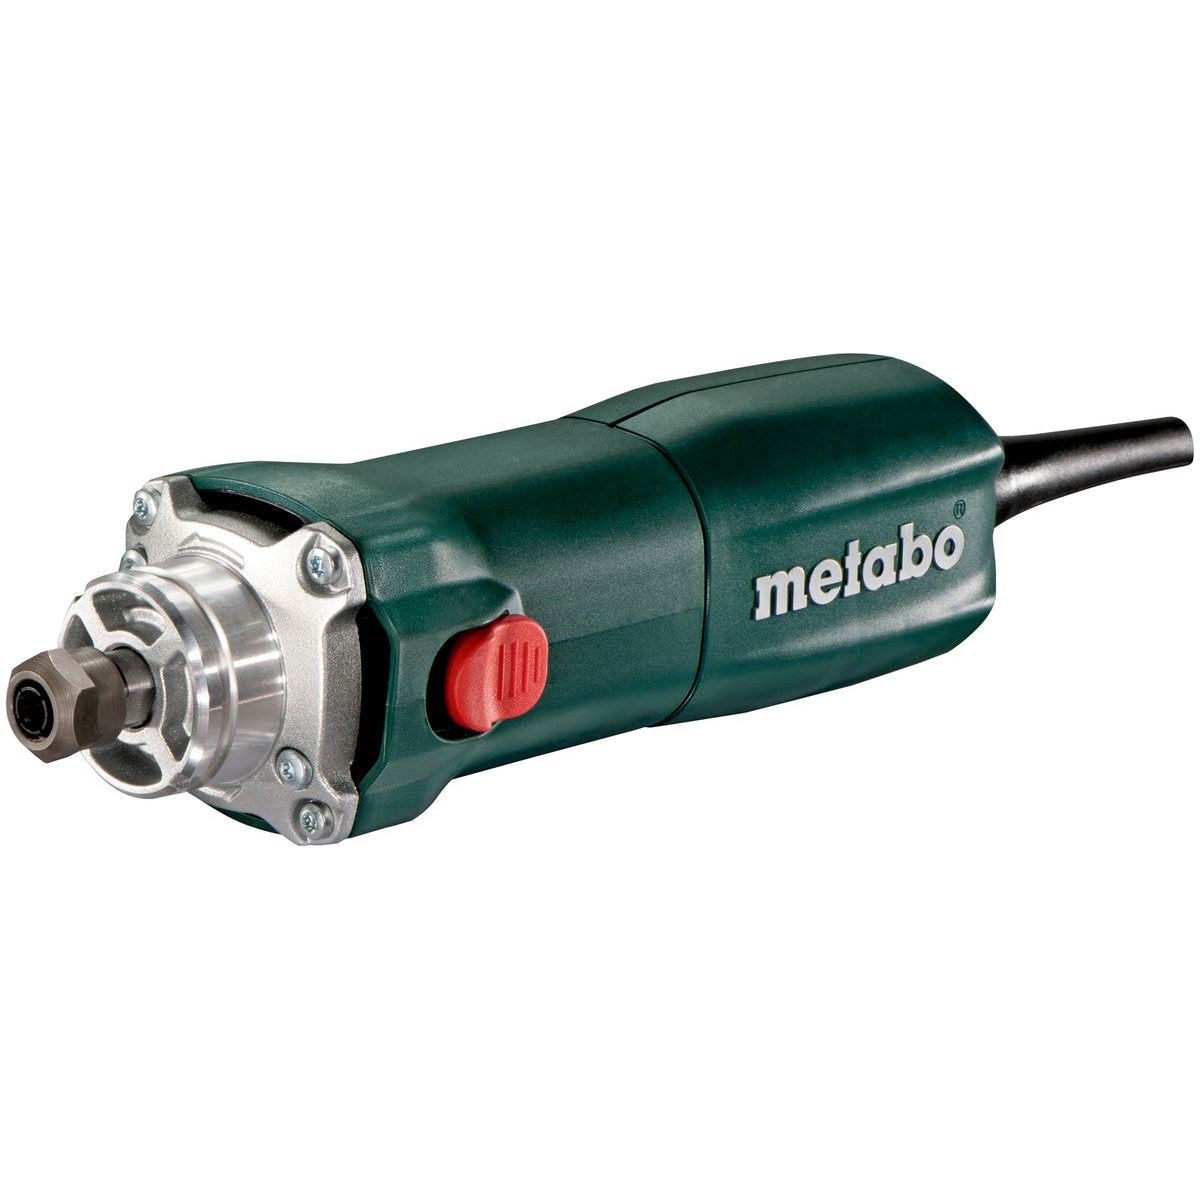 GE 710 Compact Meuleuse droite Metabo